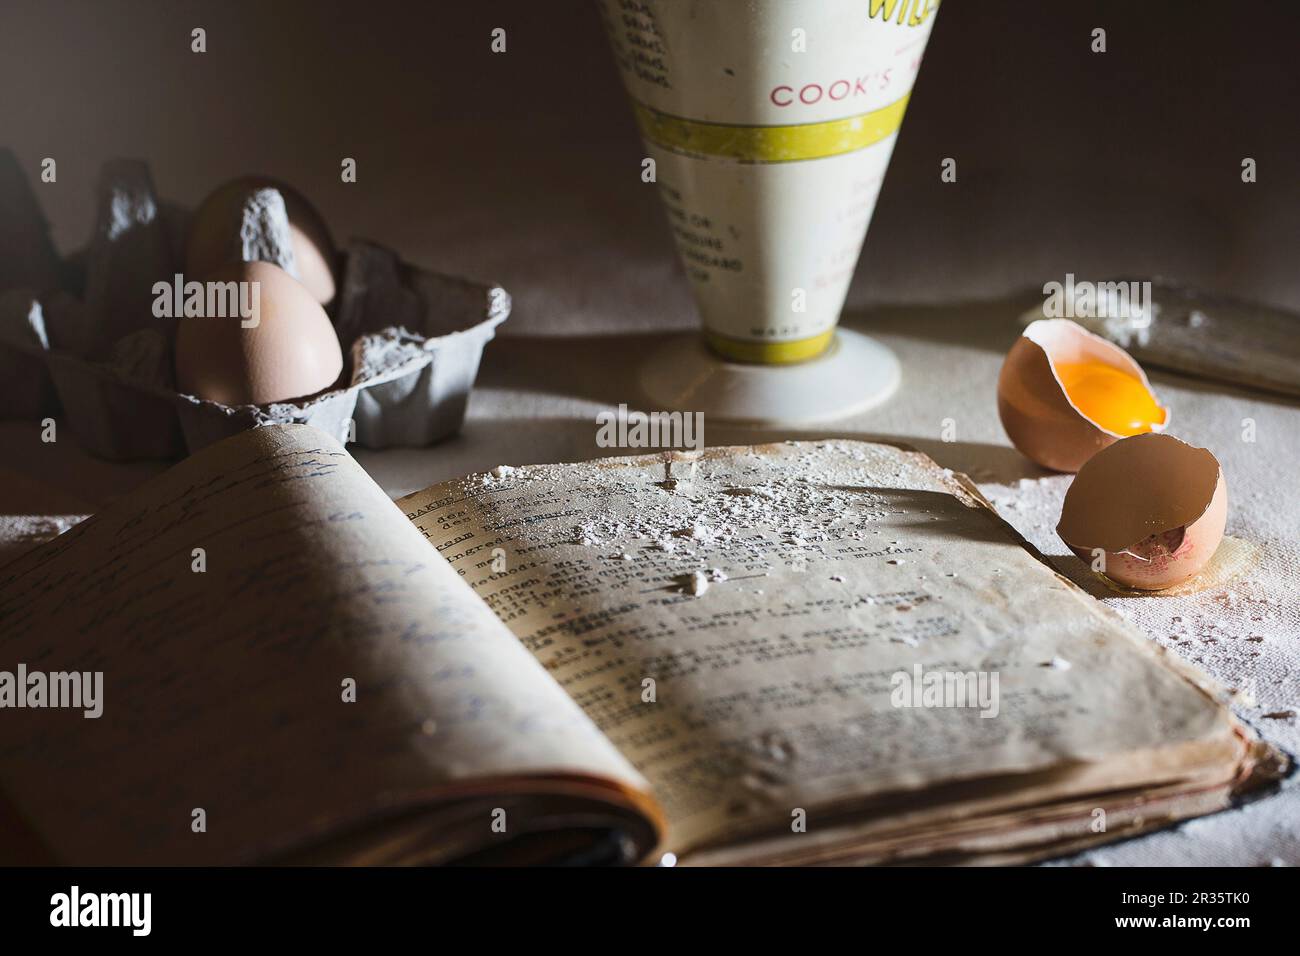 A baking scene with and old recipe book, eggs and flour Stock Photo